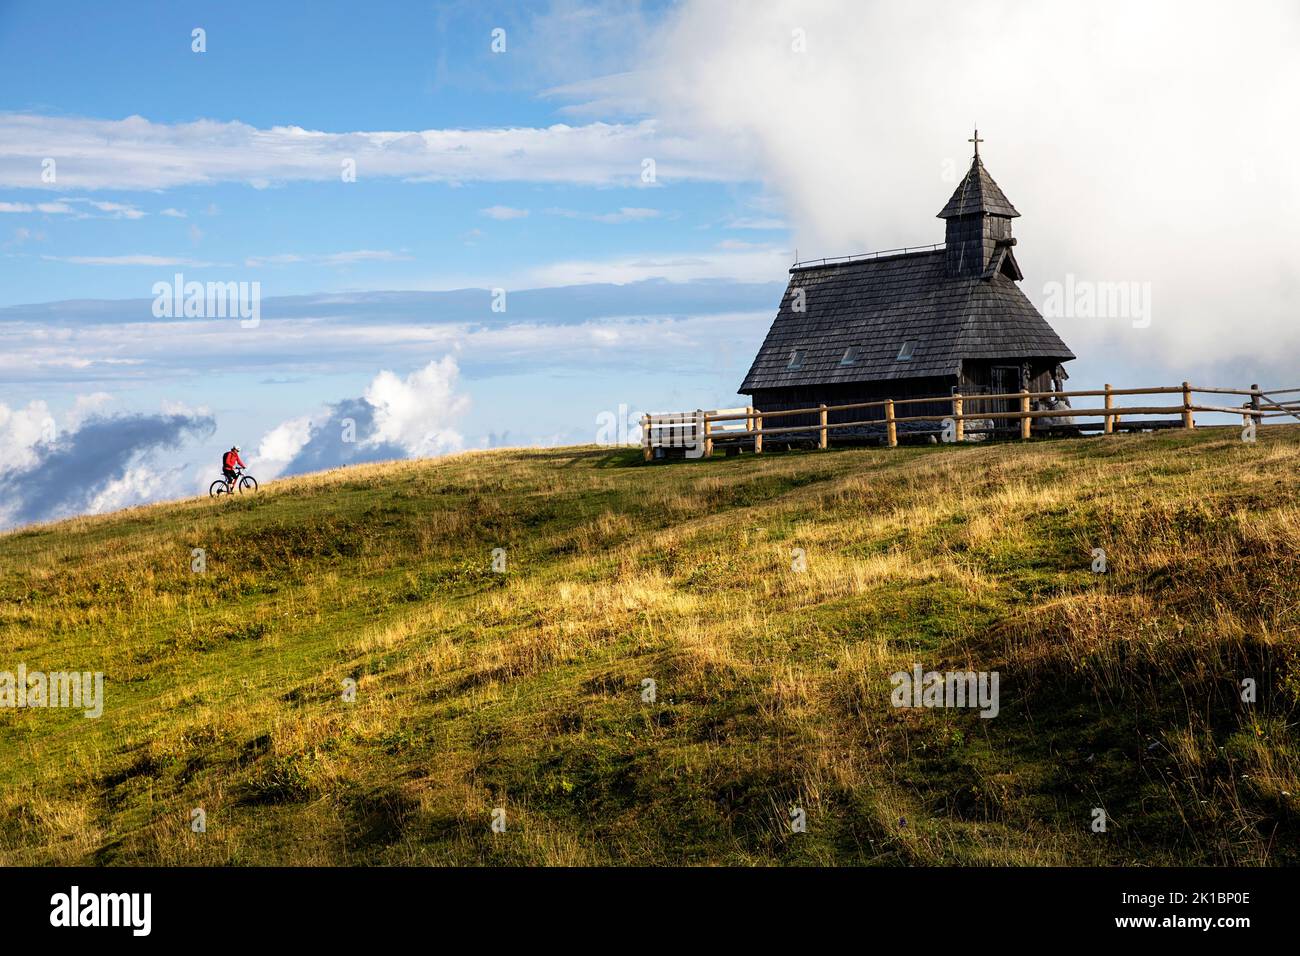 A Mountain biker on a  cycling trip to the wooden Chapel of Mary of the Snows on Velika Planina plateau near Kamnik, Slovenia Stock Photo